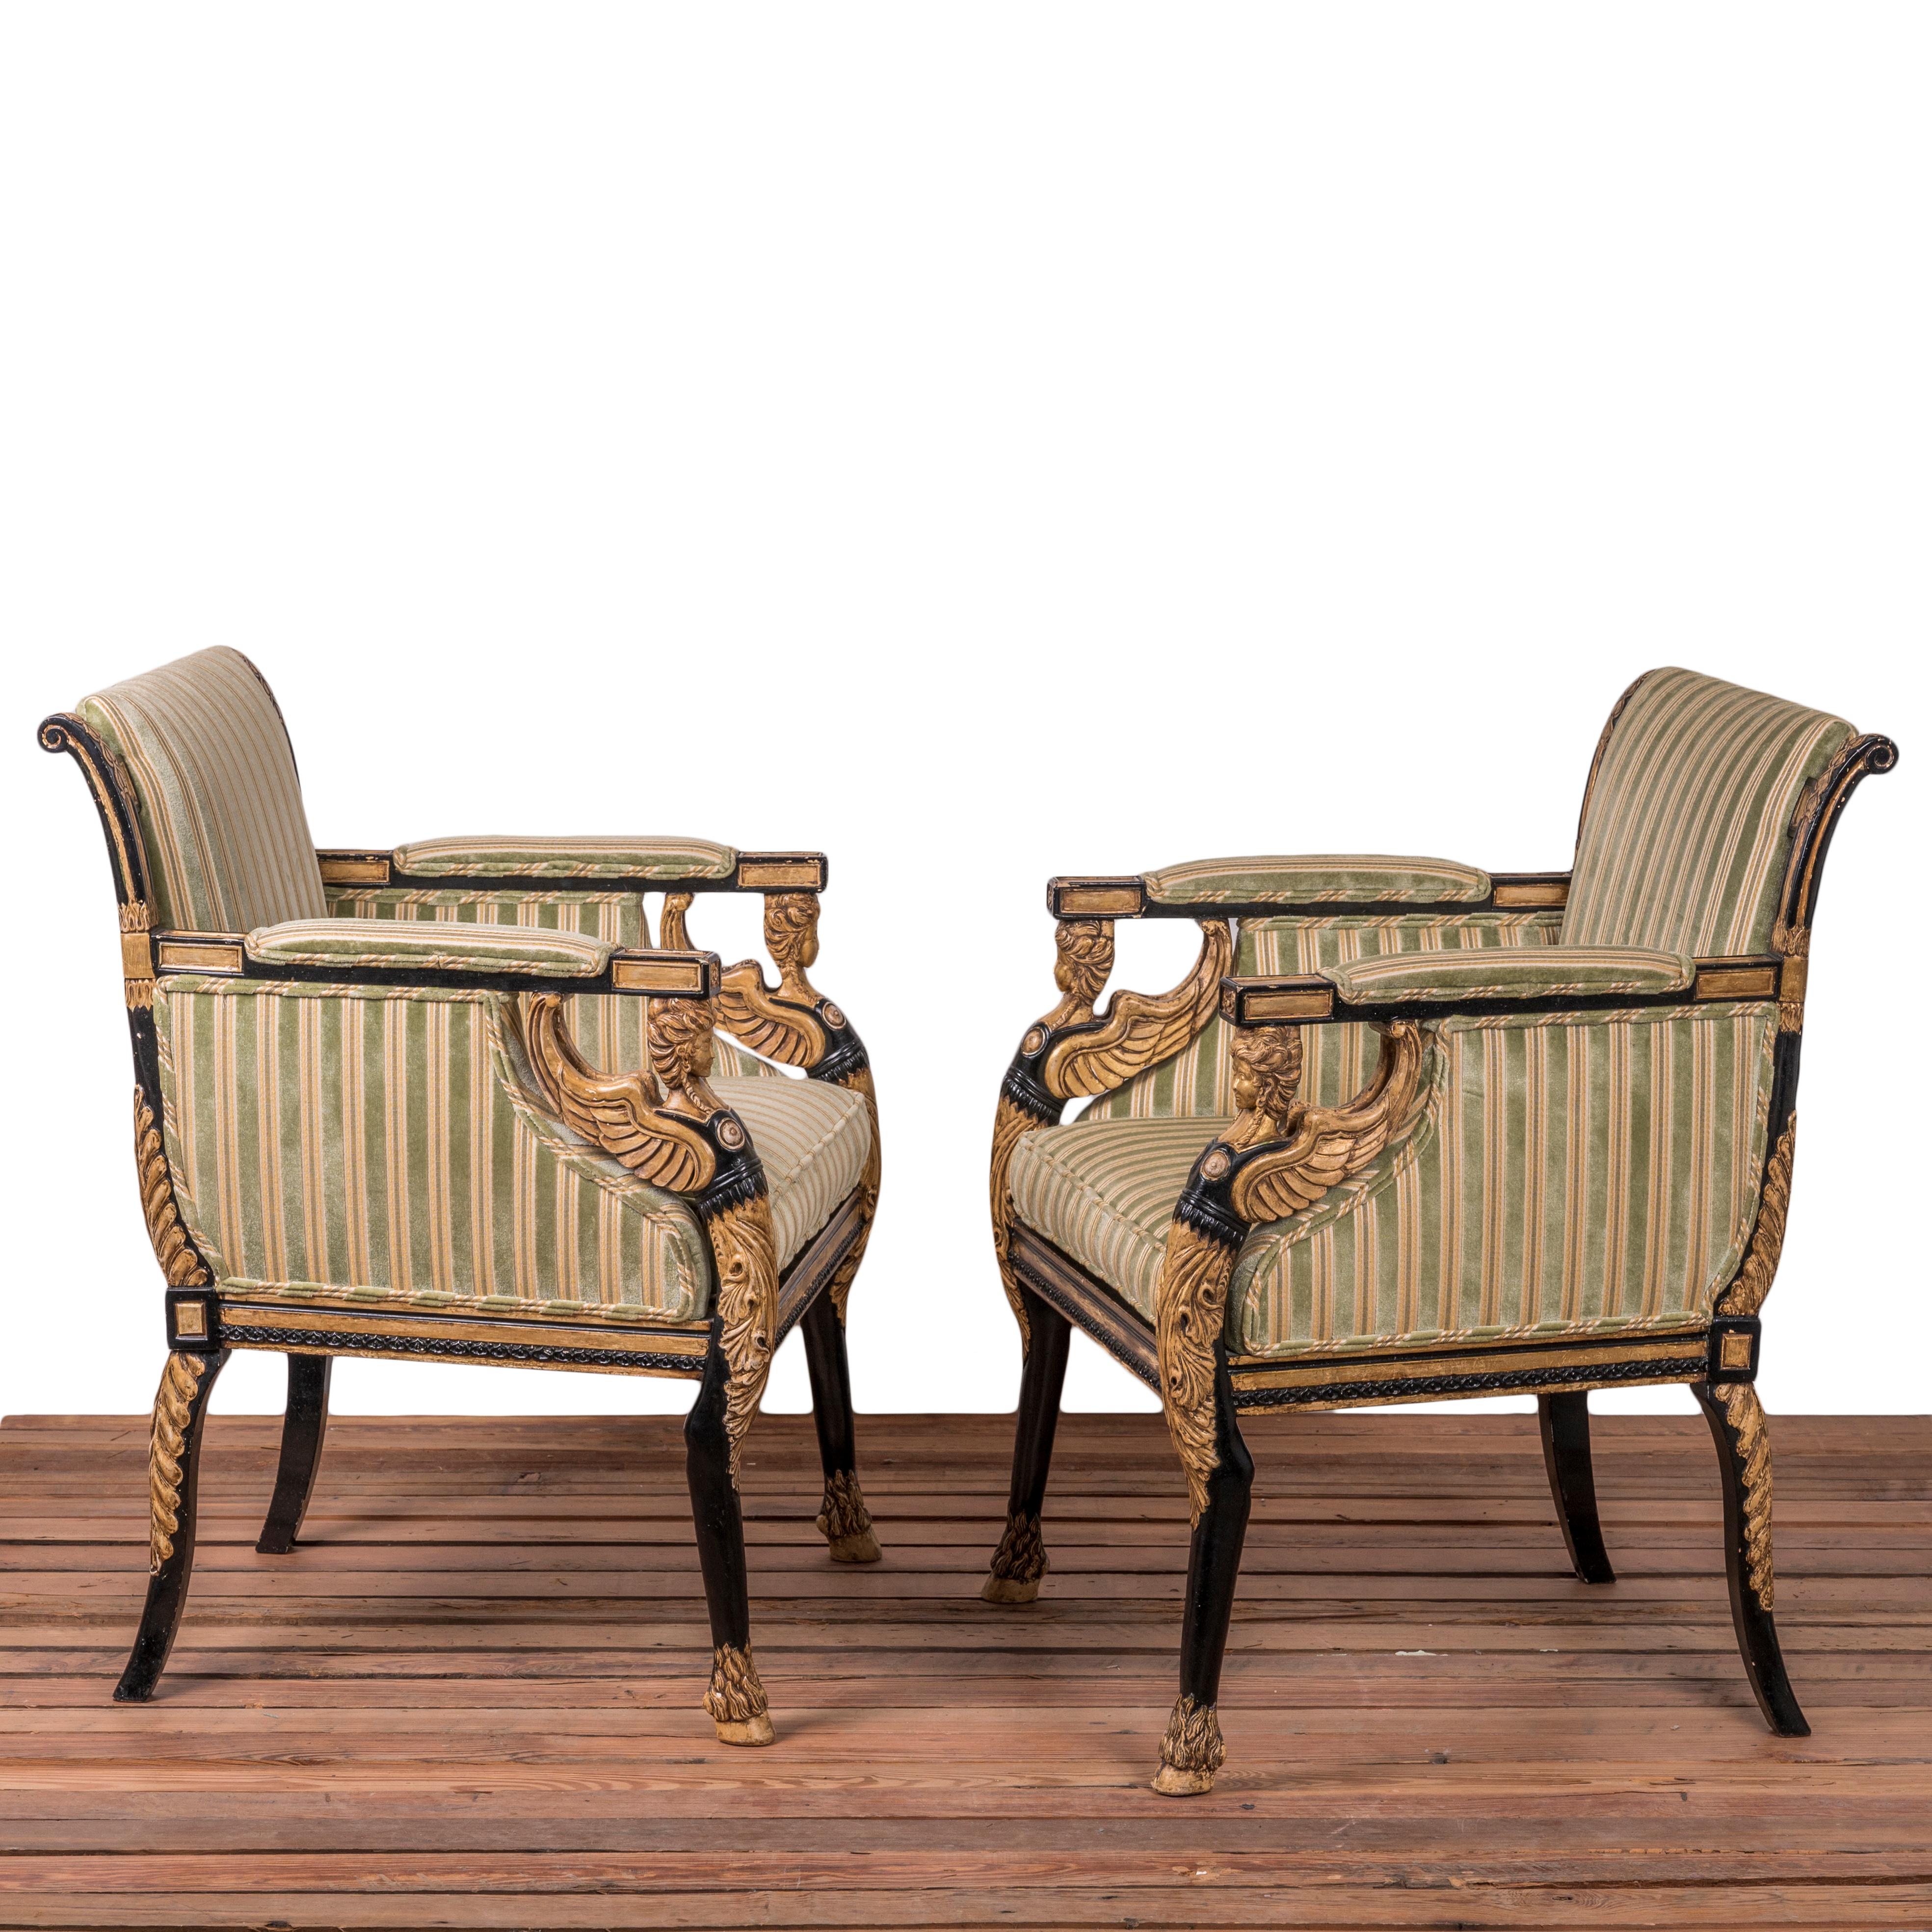 20th Century English Regency Style Ebonized and Parcel Gilt Chairs - A Pair For Sale